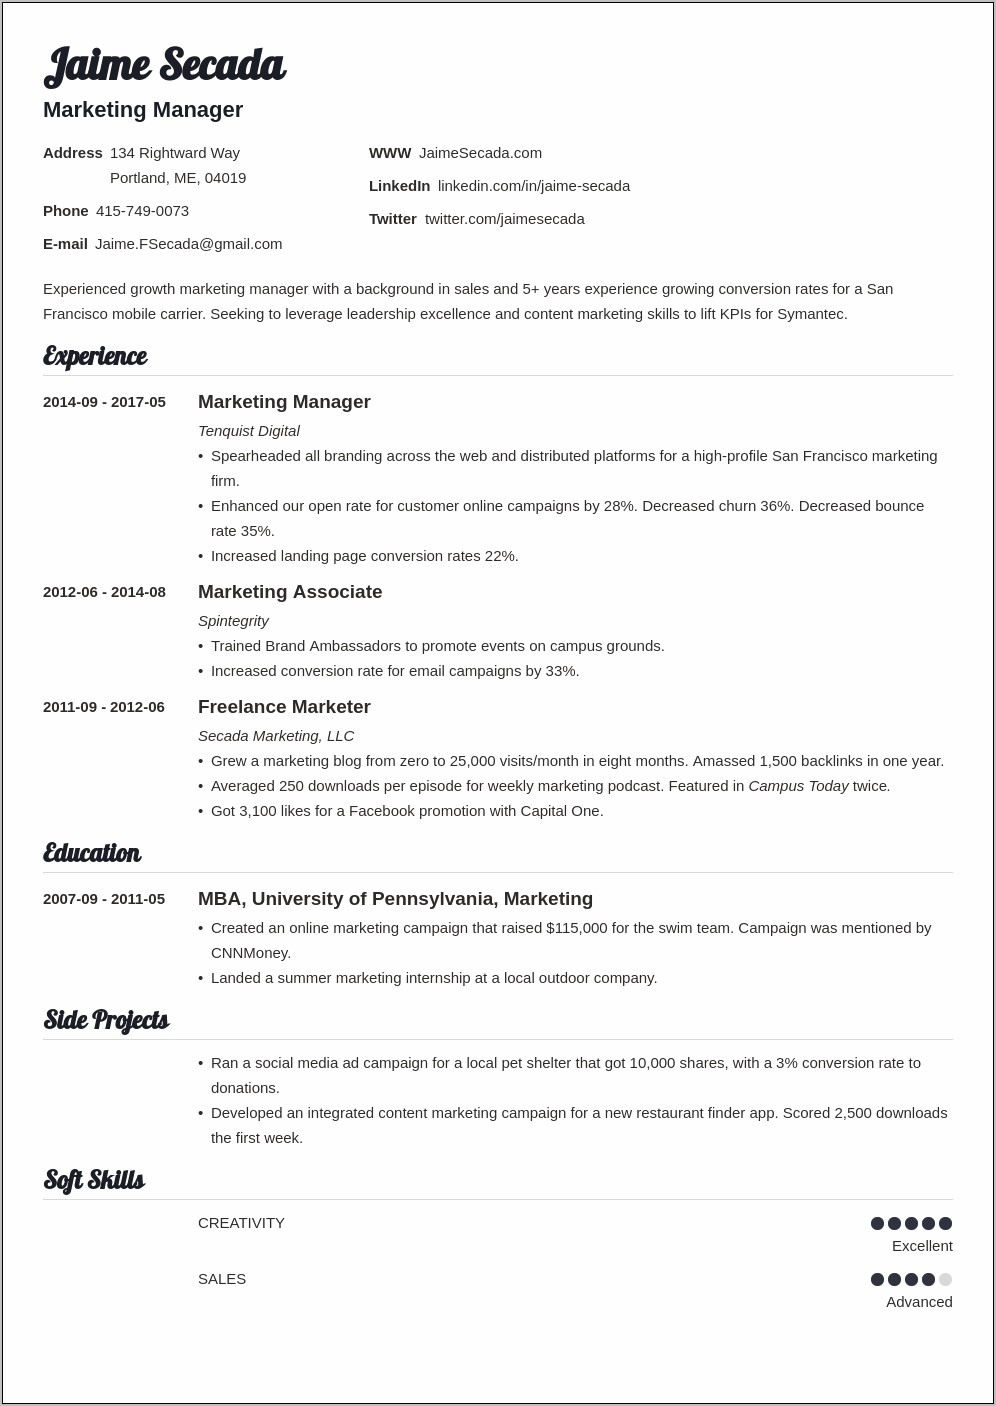 Best Resume For Marketing Positions